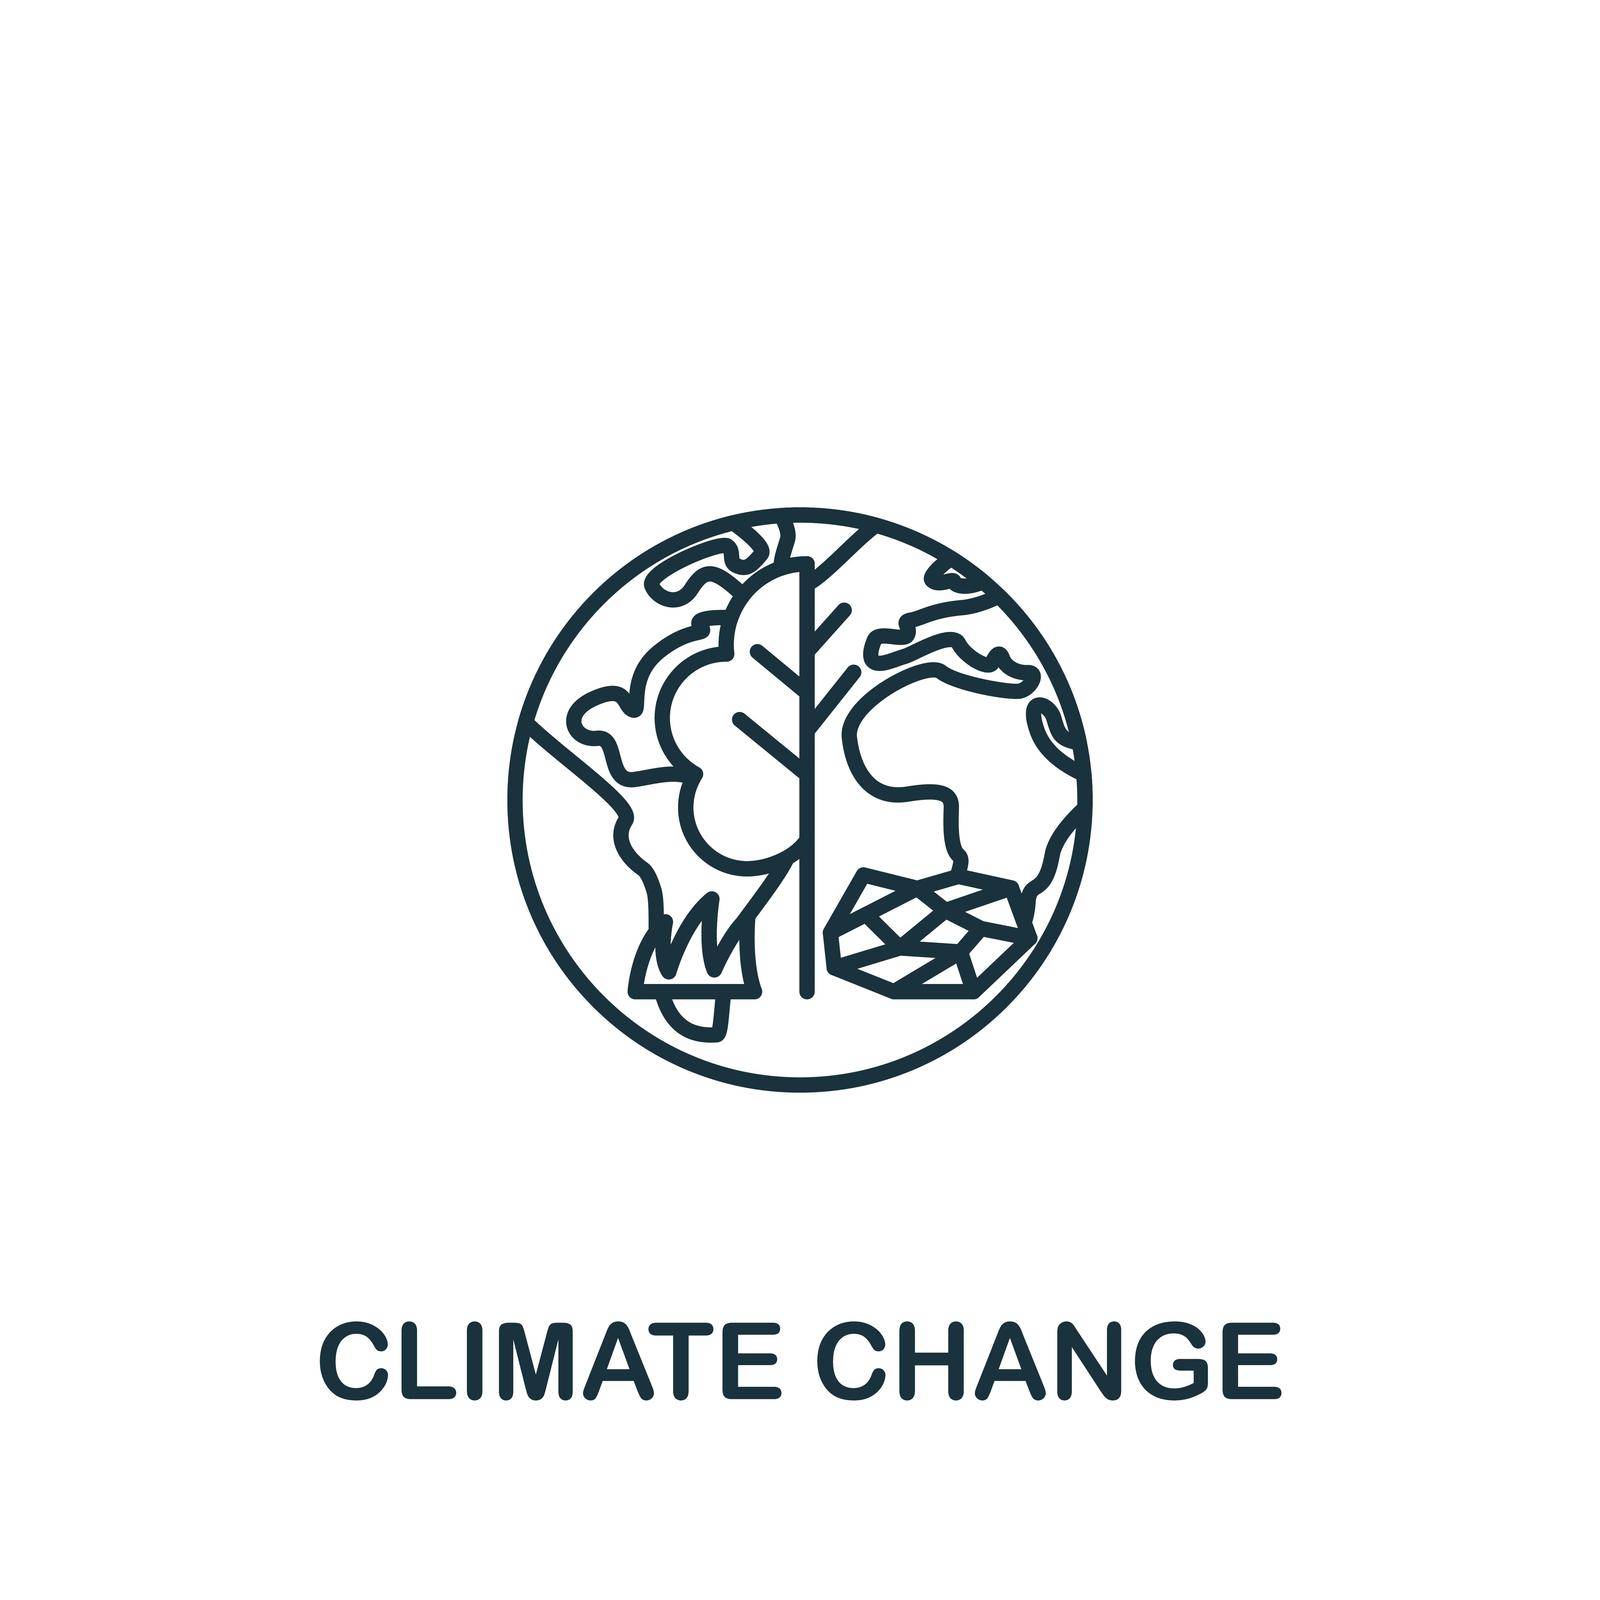 Climate Change icon. Simple line element symbol for templates, web design and infographics.